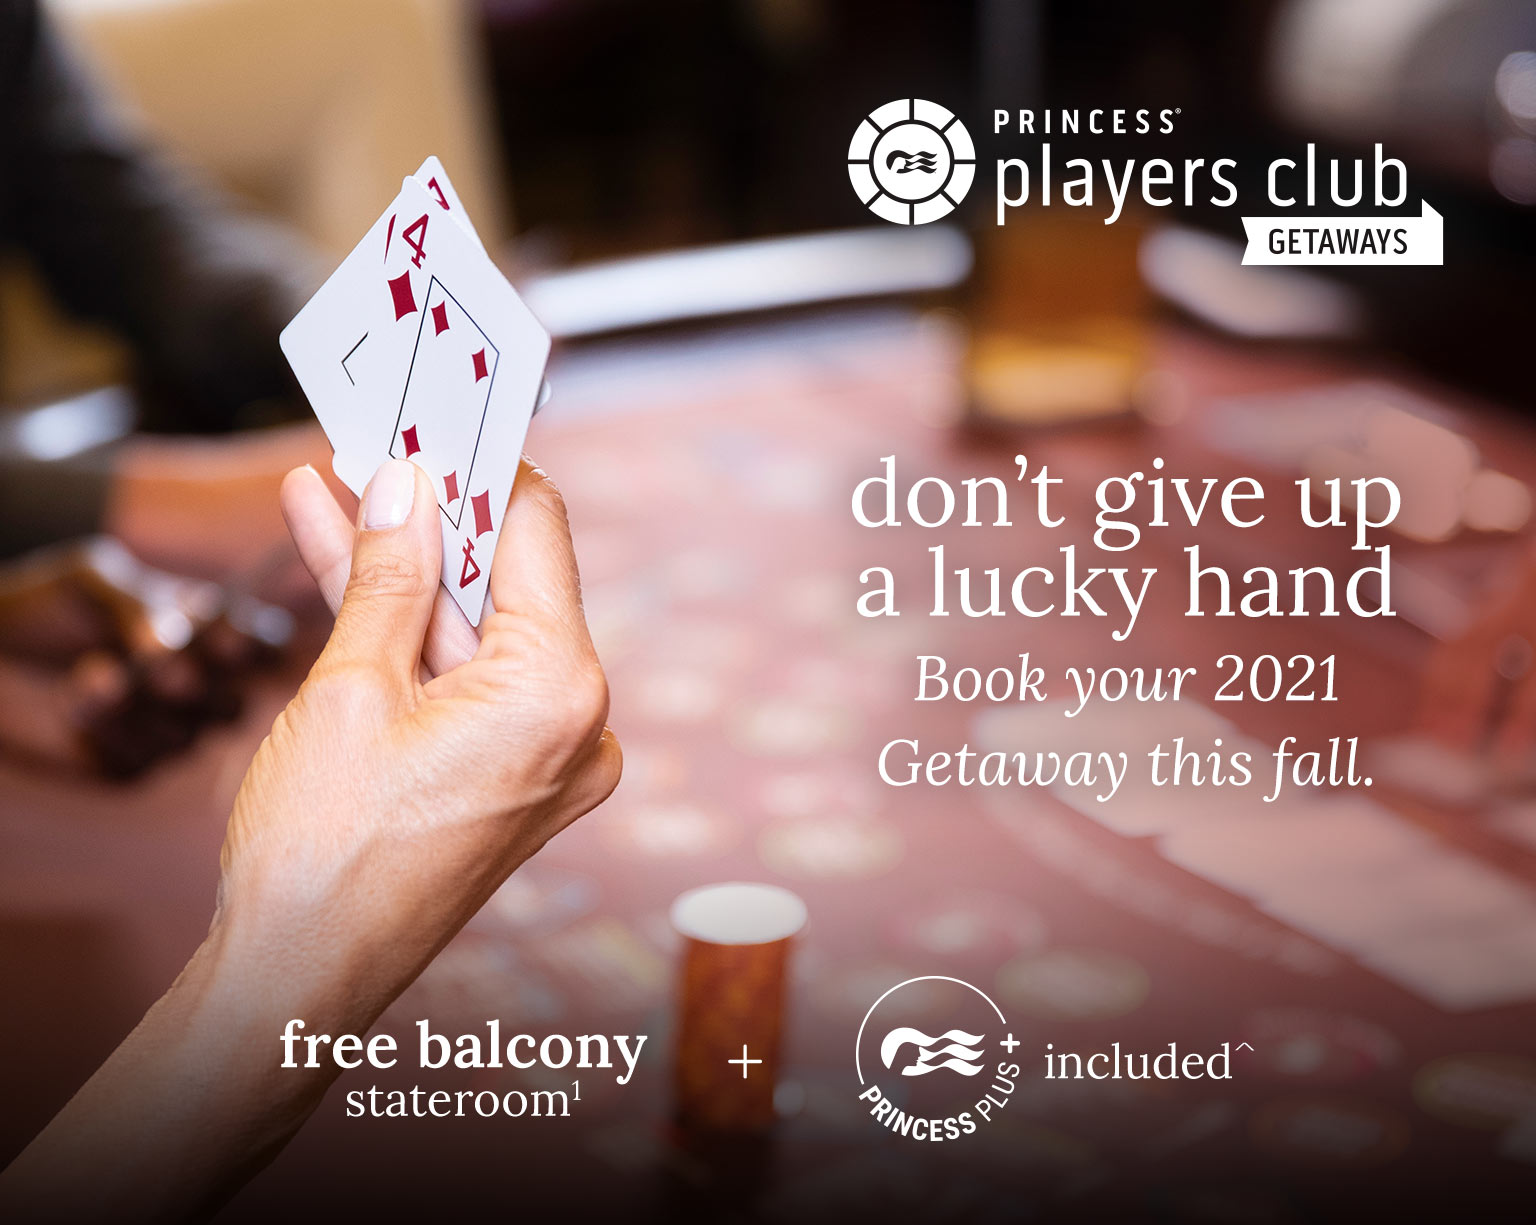 A man and a woman cheer at the slot machines - Princess Players Club Getaways - Don't give up a lucky hand, book your 2021 getaway! - free balcony stateroom + princess plus+ included^